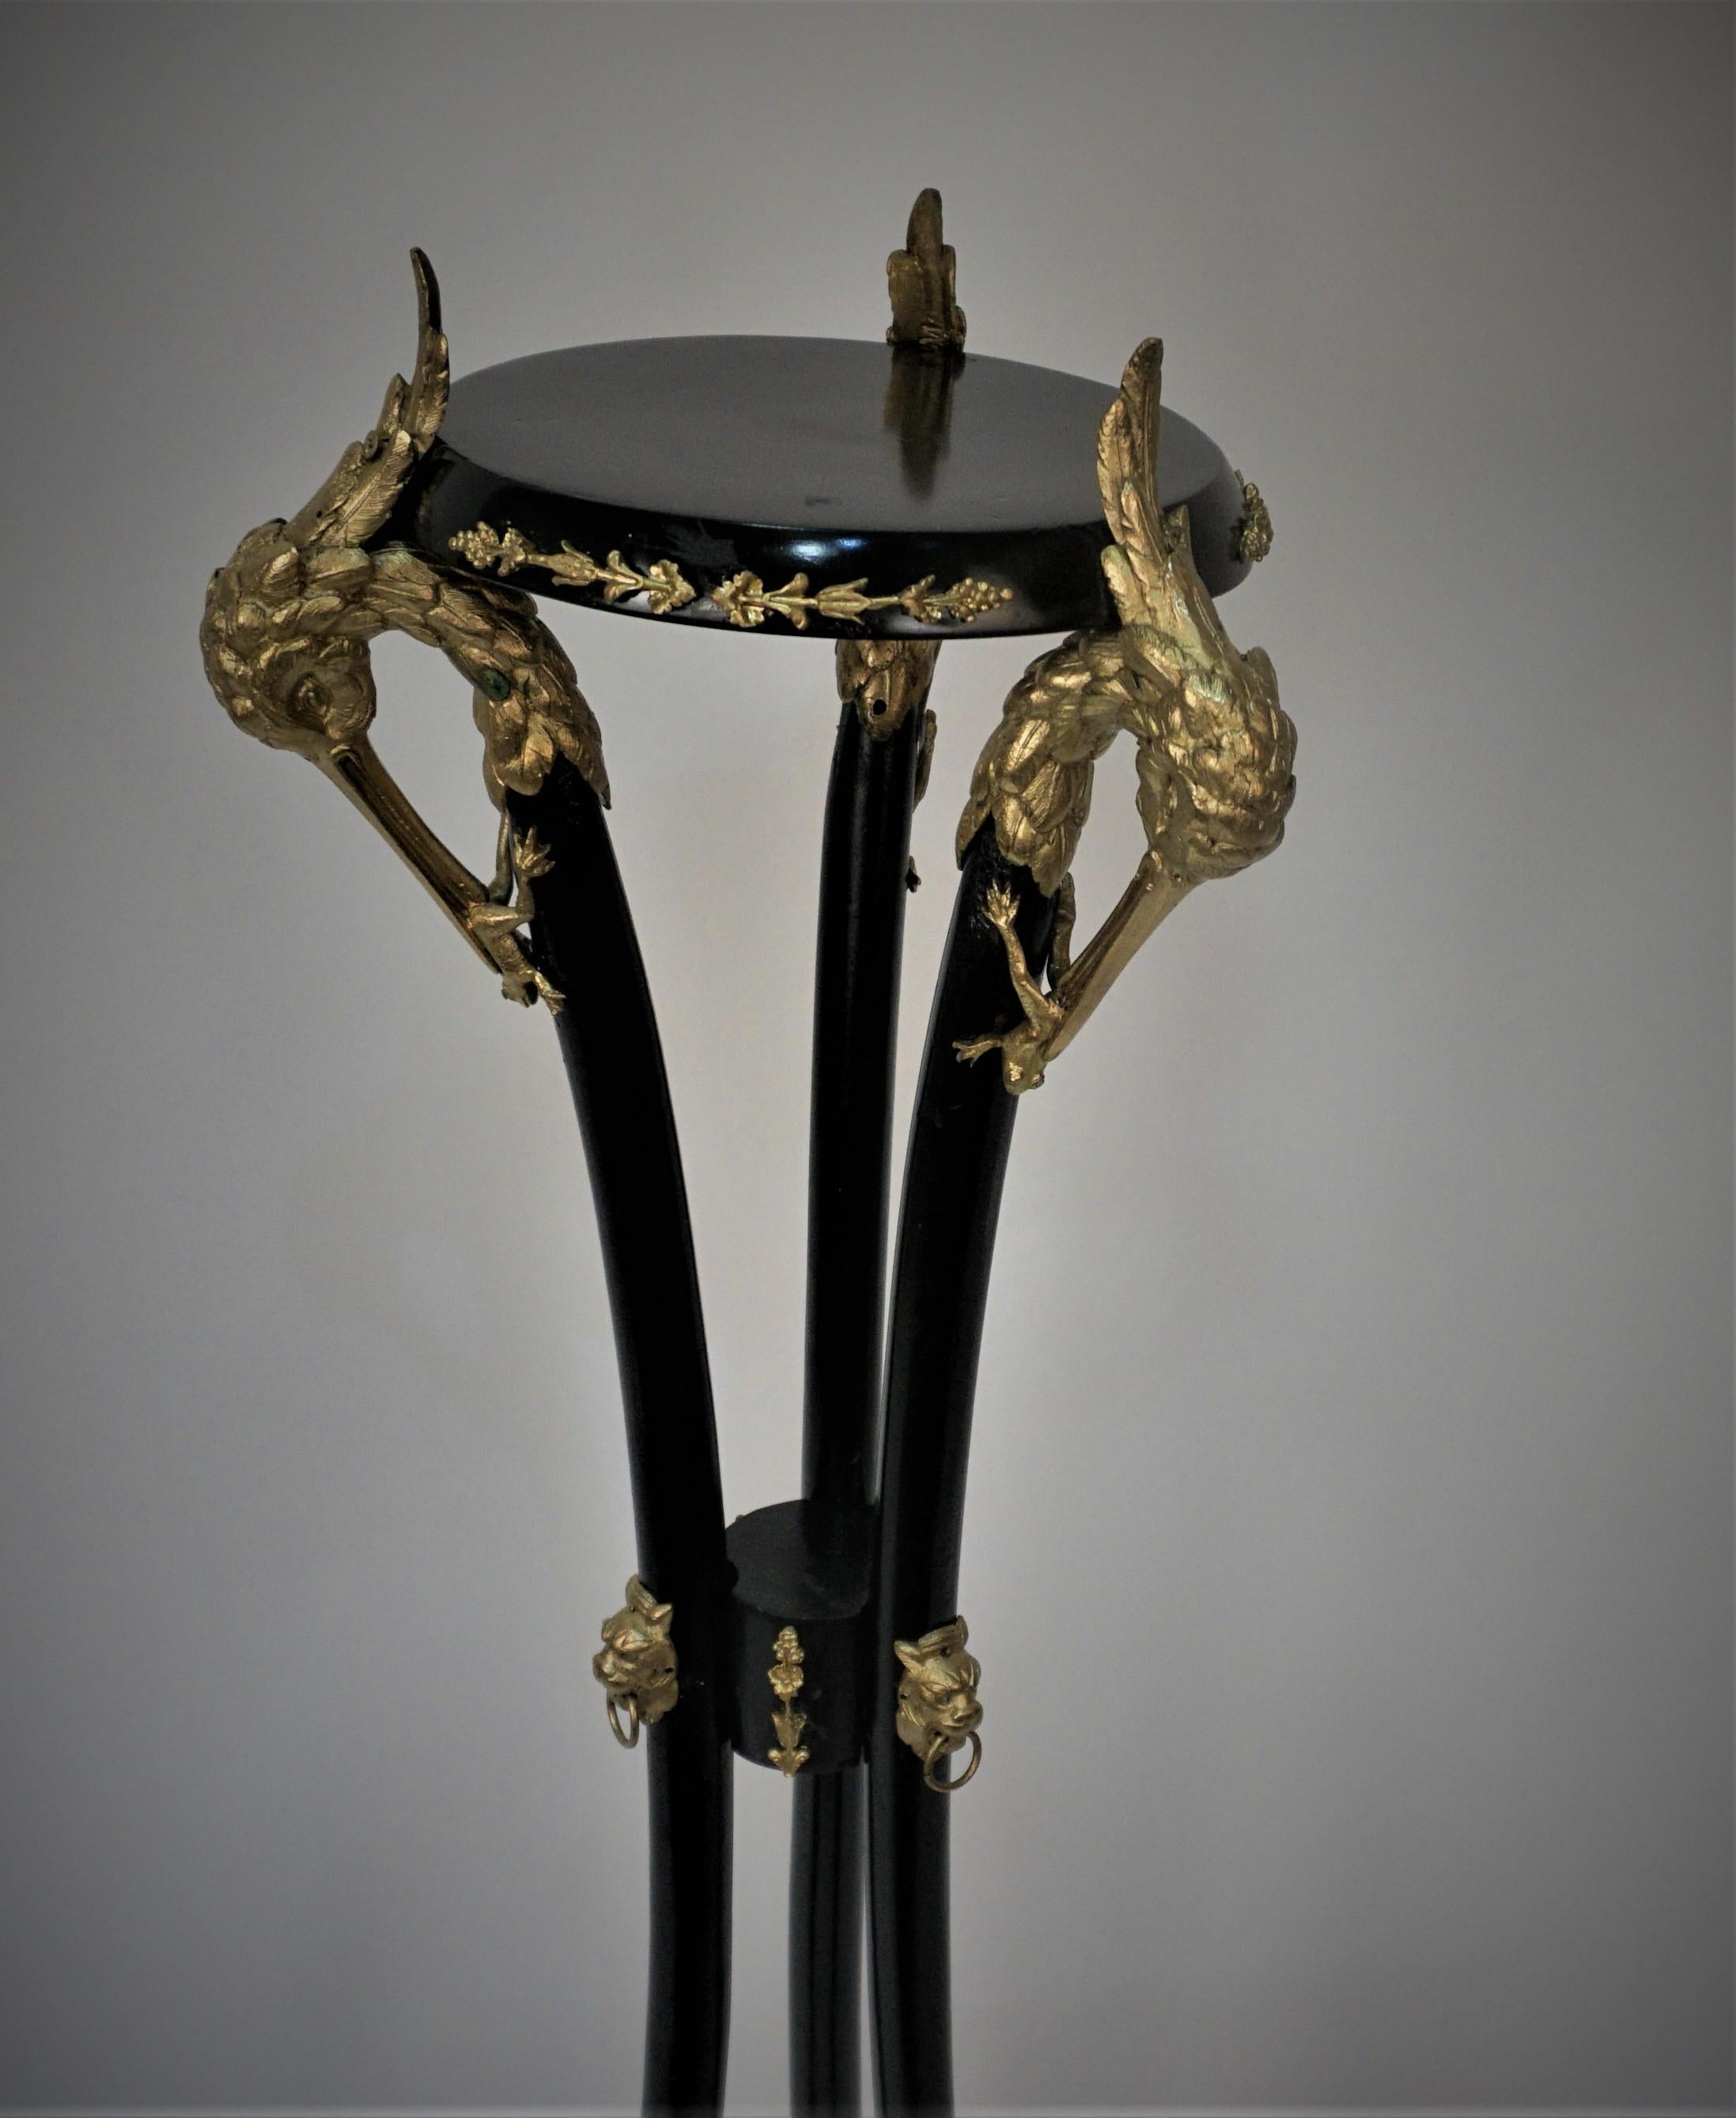 19th century black lacquered and bronze plant stand.
Measurement: 12